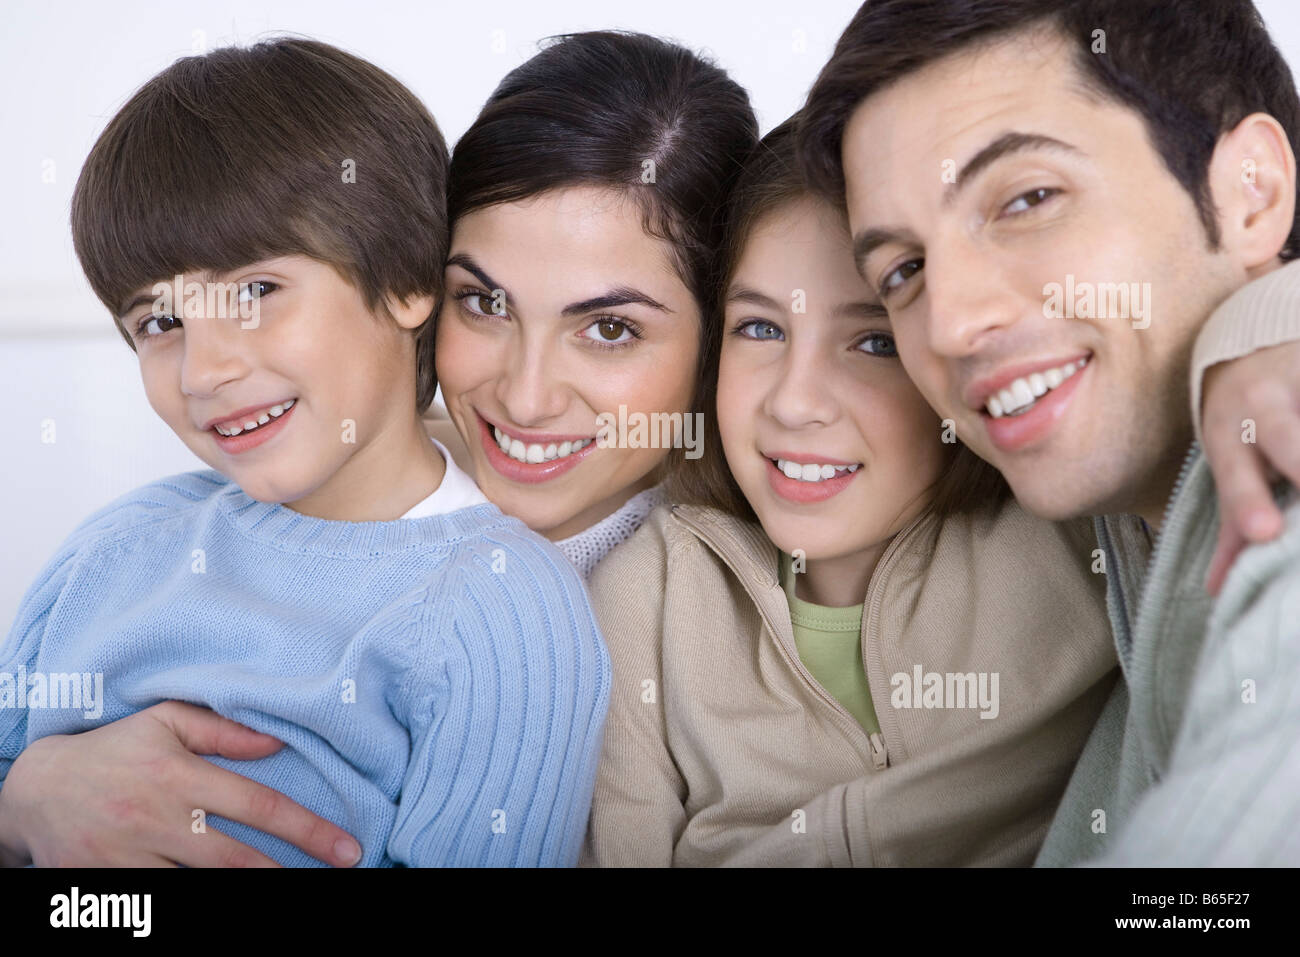 Portrait of family with two children, close-up Stock Photo